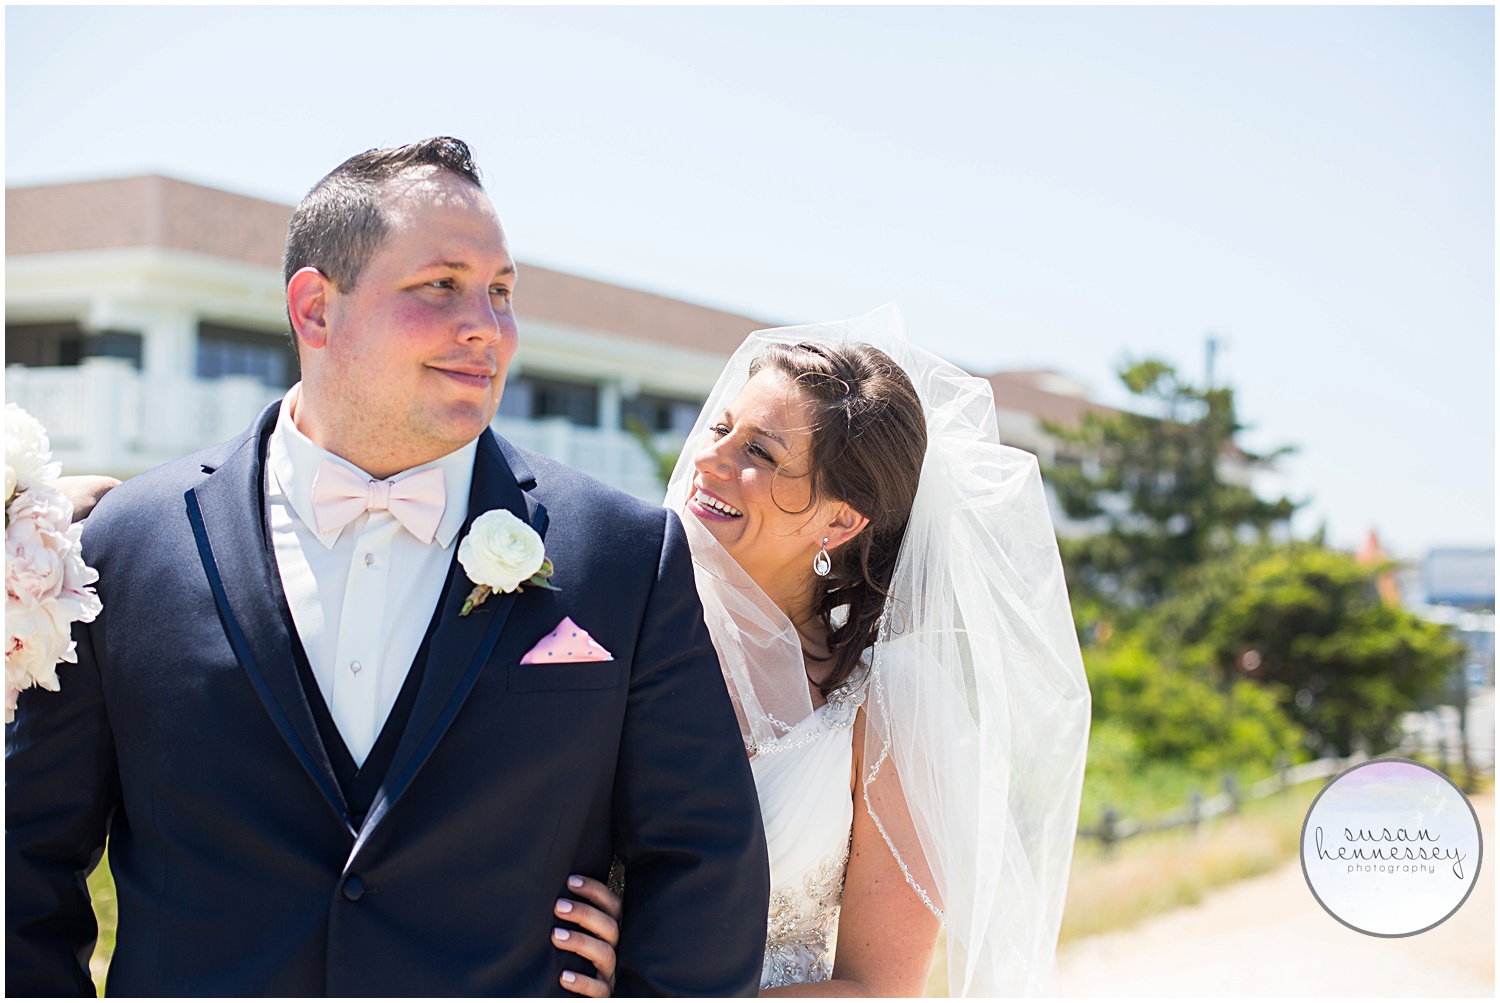 First Look for couple at their Icona Golden Inn Wedding - Photography by Susan Hennessey Photography